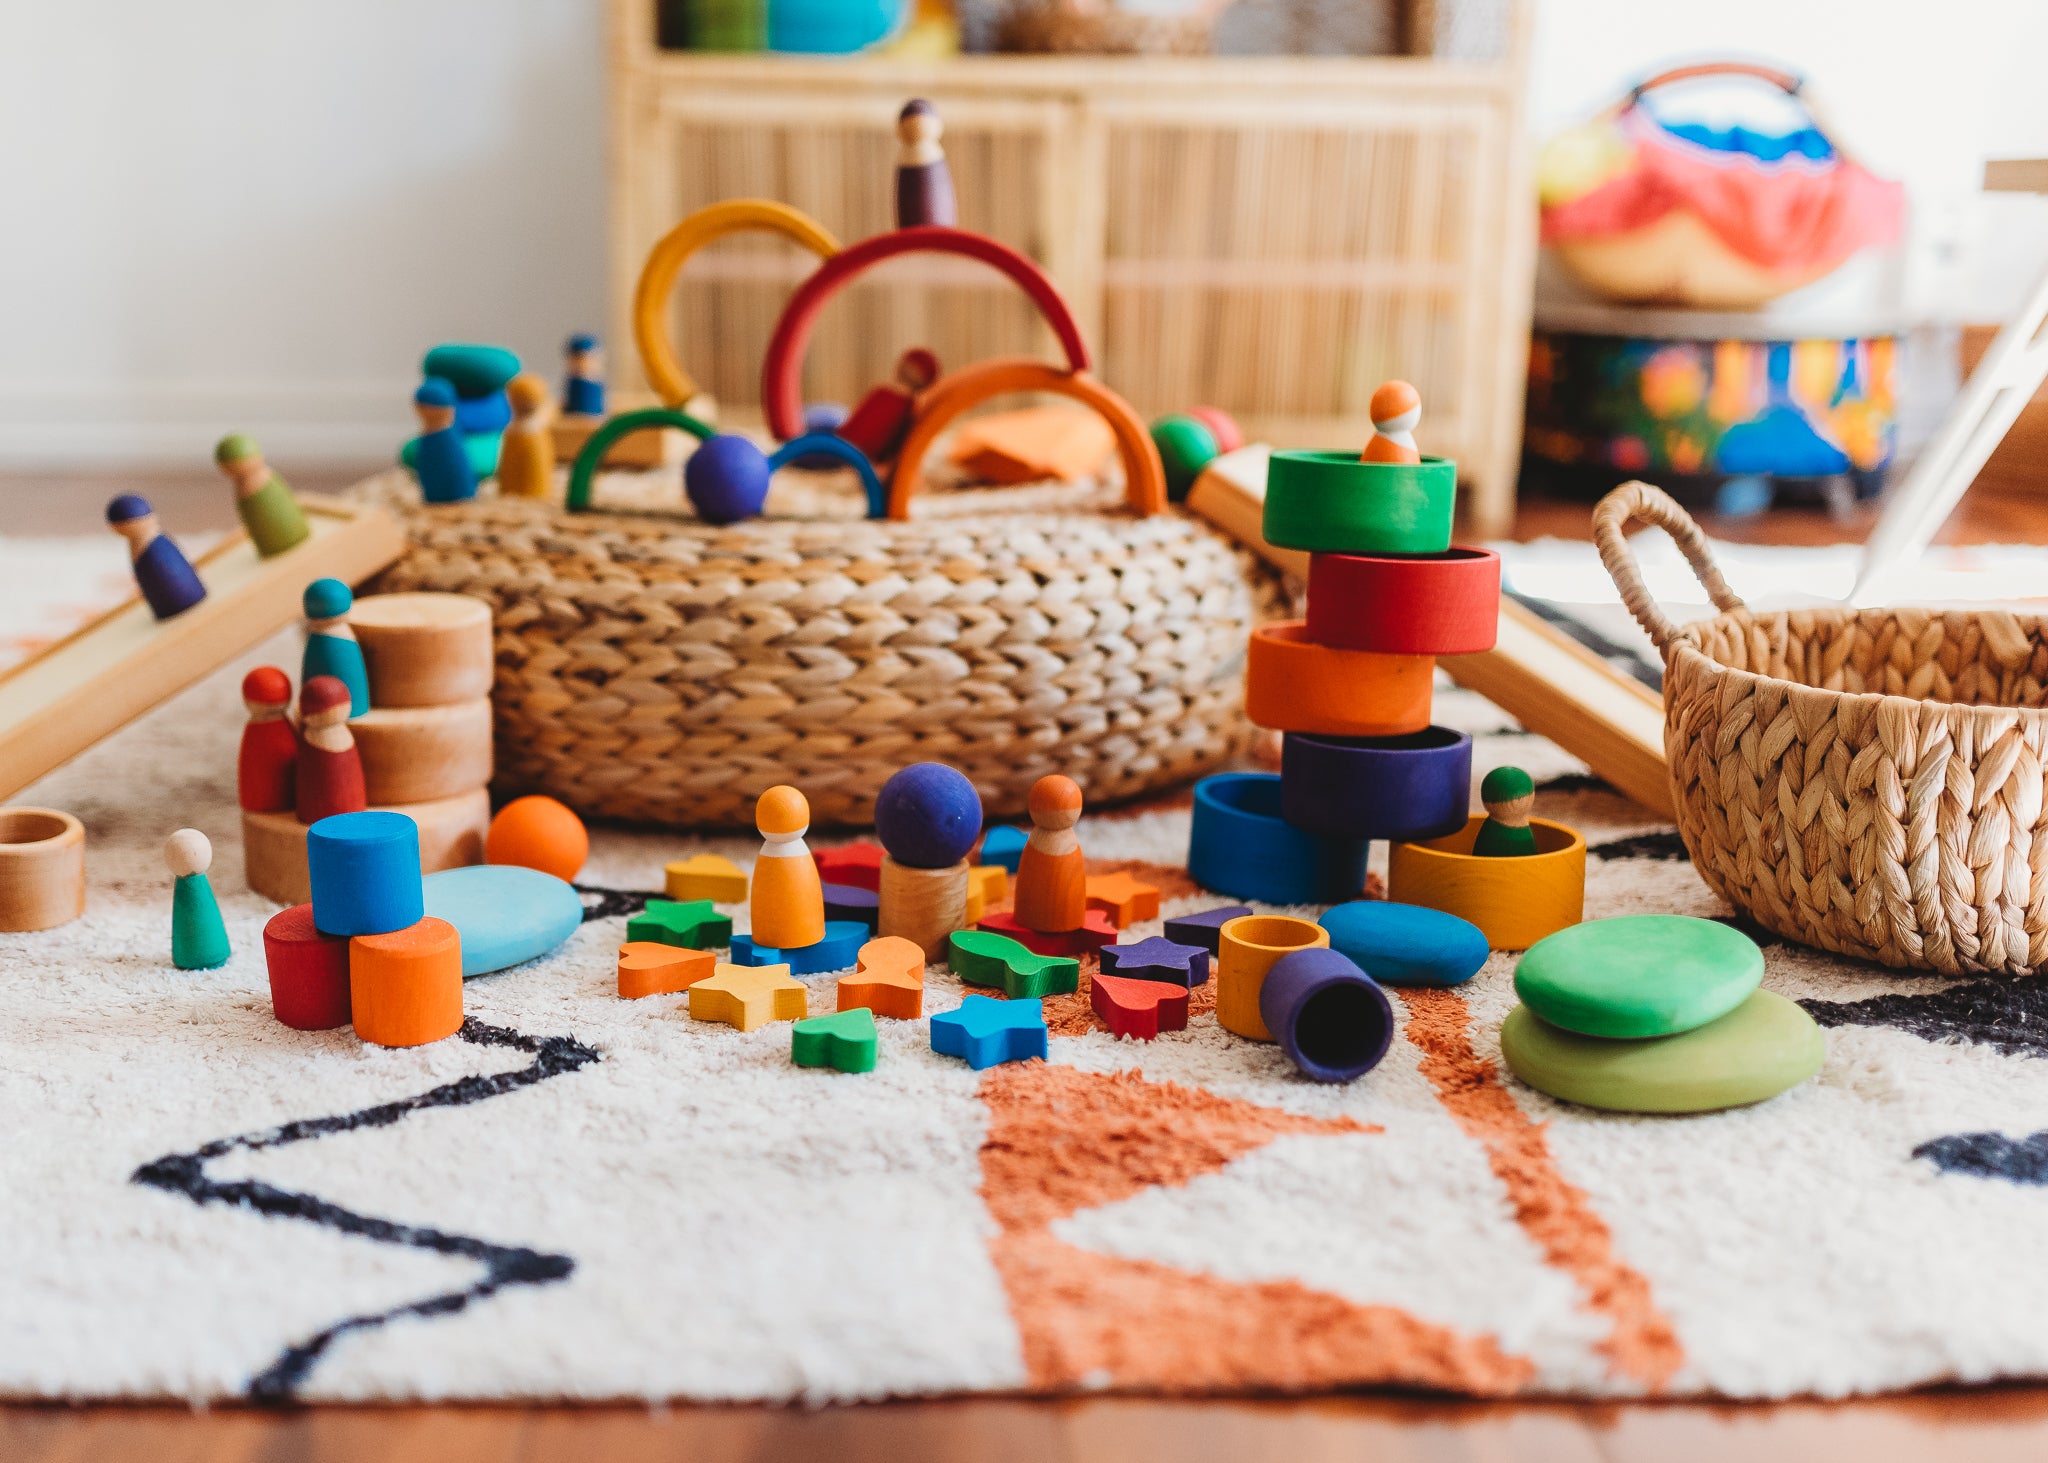 What are Waldorf Toys?